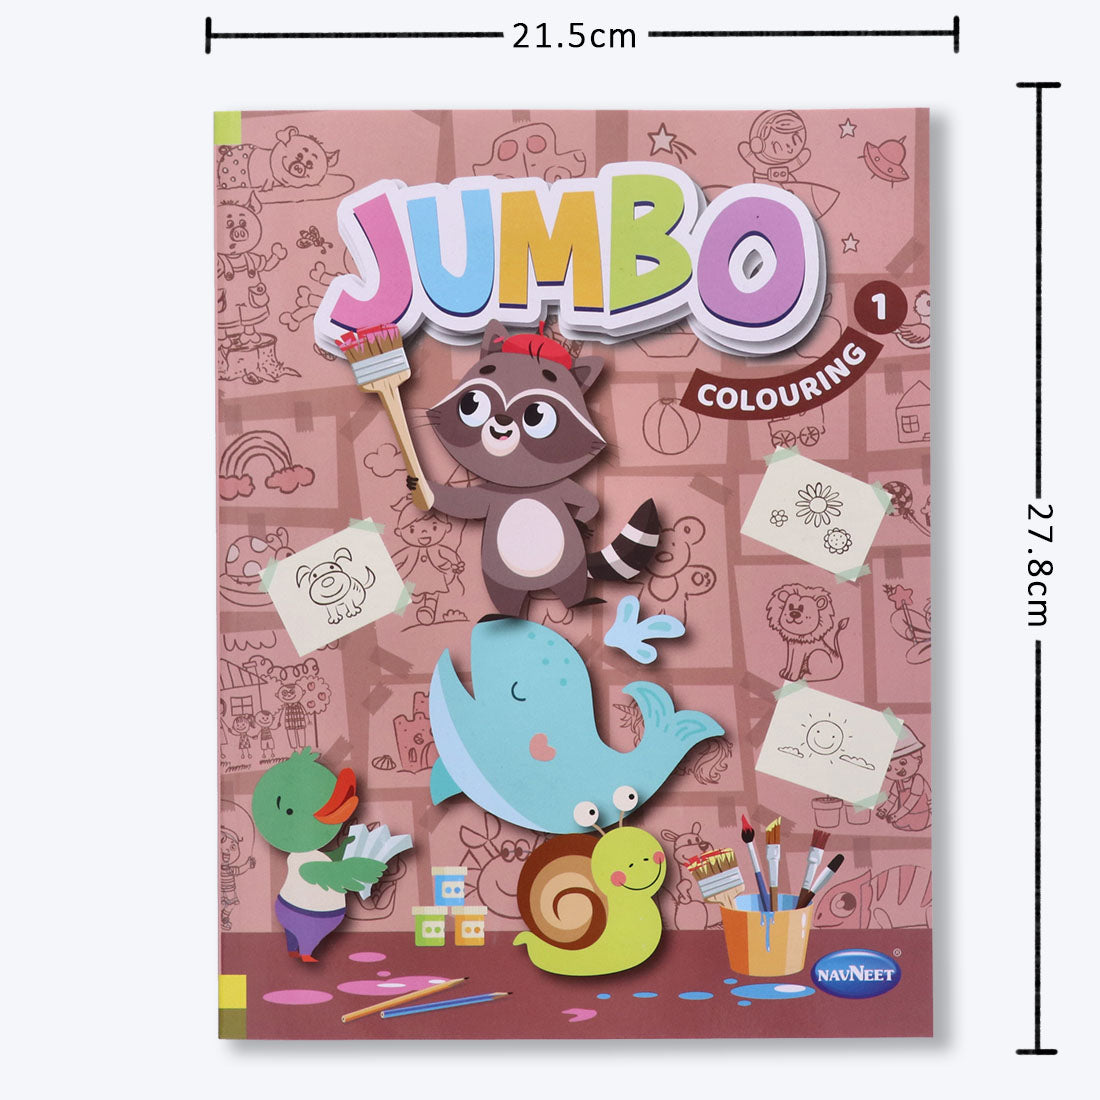 Navneet's Jumbo Colouring Book I - can be used with colour pencils or crayons for age group.